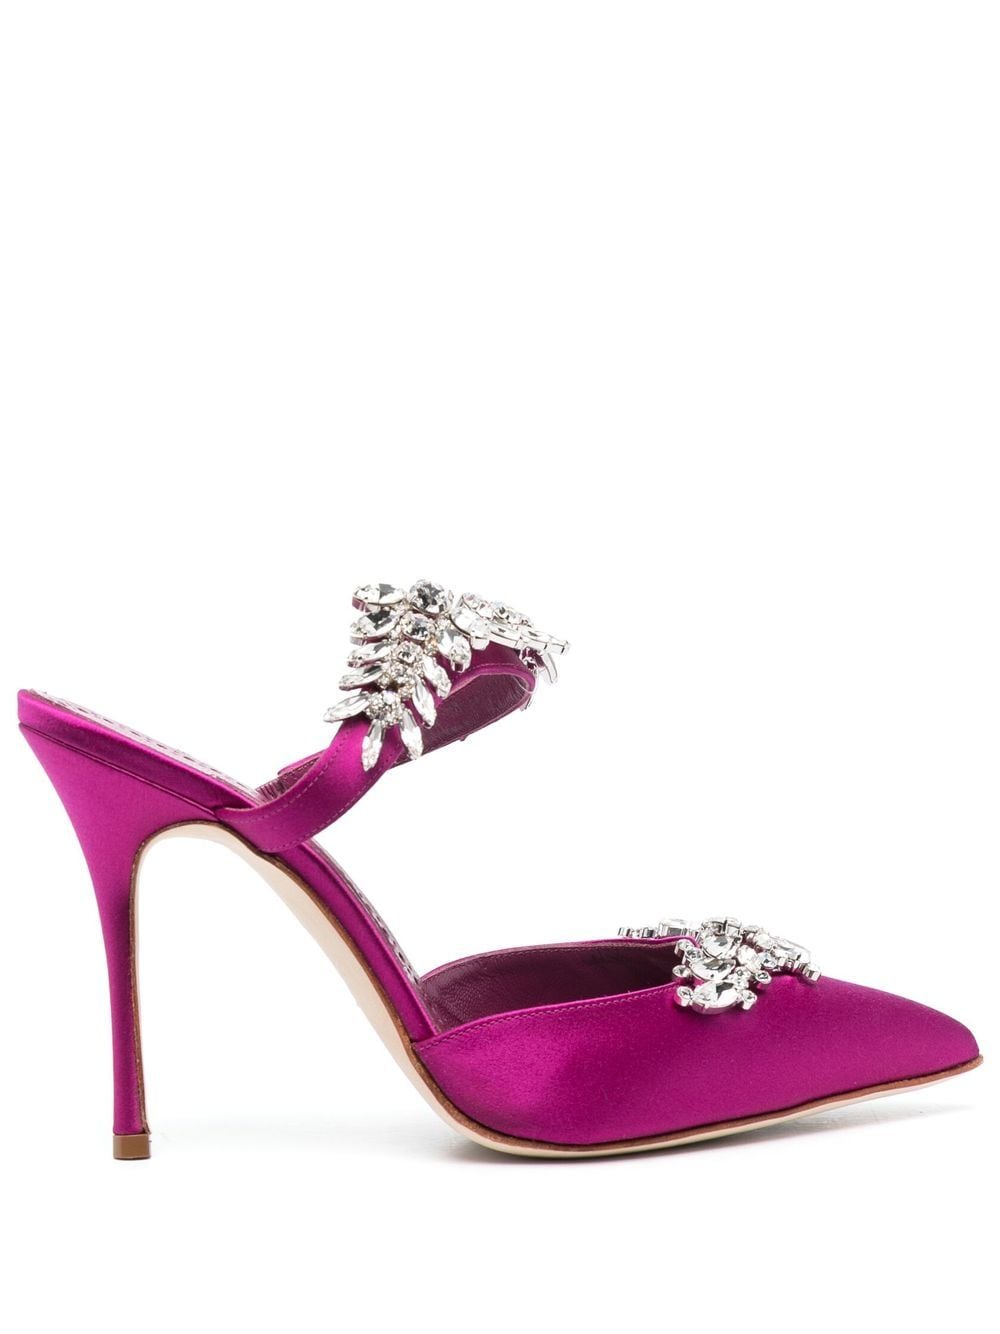 Lurum crystal-embellished 105mm pumps Profile Picture